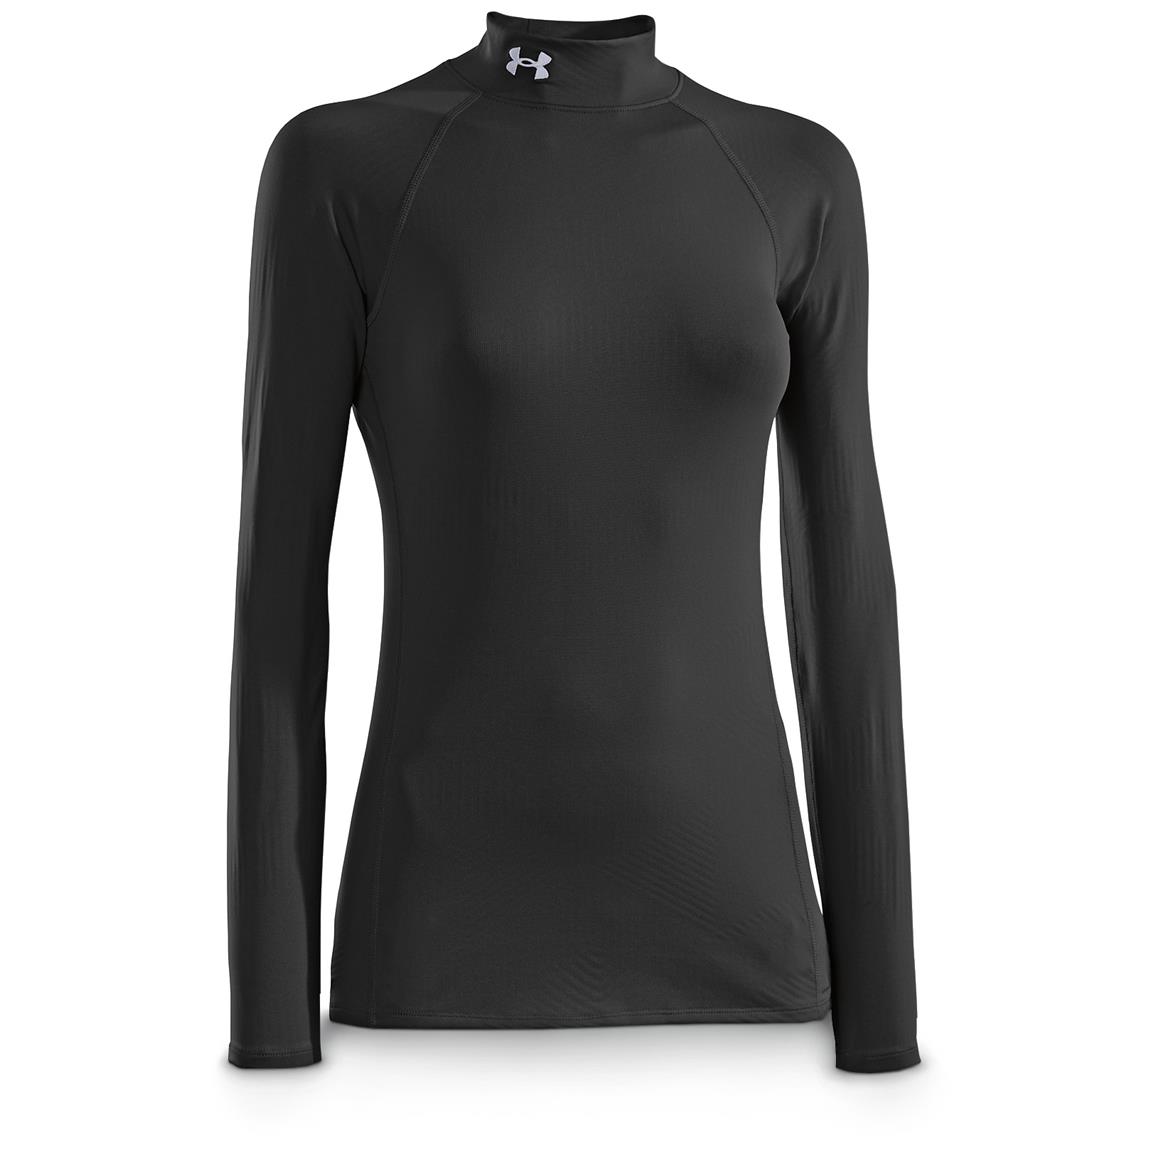 under armour infrared base layer